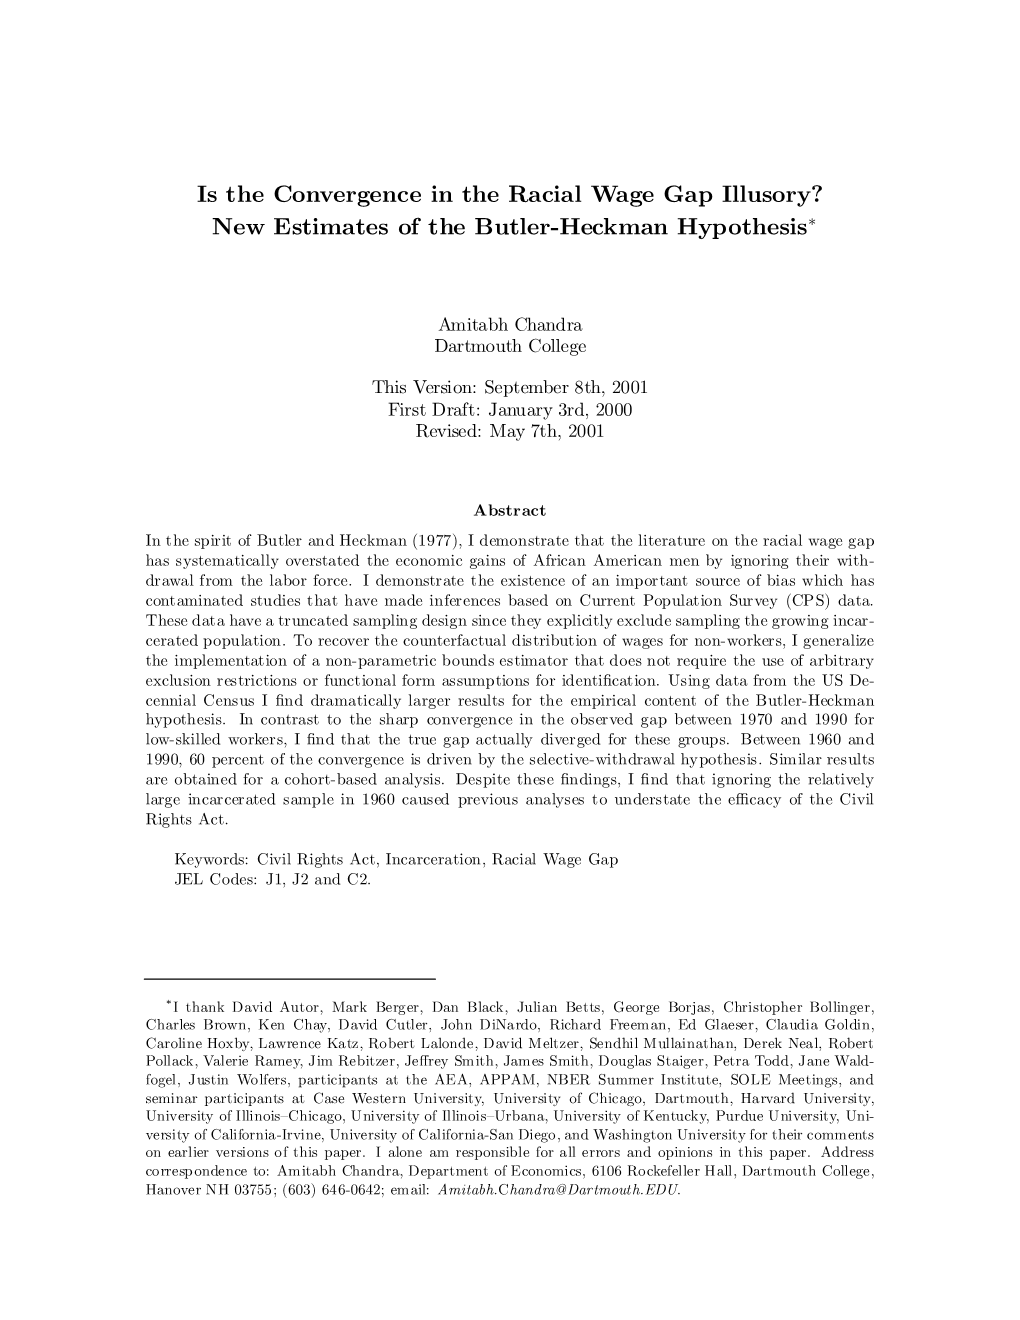 Is the Convergence in the Racial Wage Gap Illusory? New Estimates of the Butler-Heckman Hypothesis¤